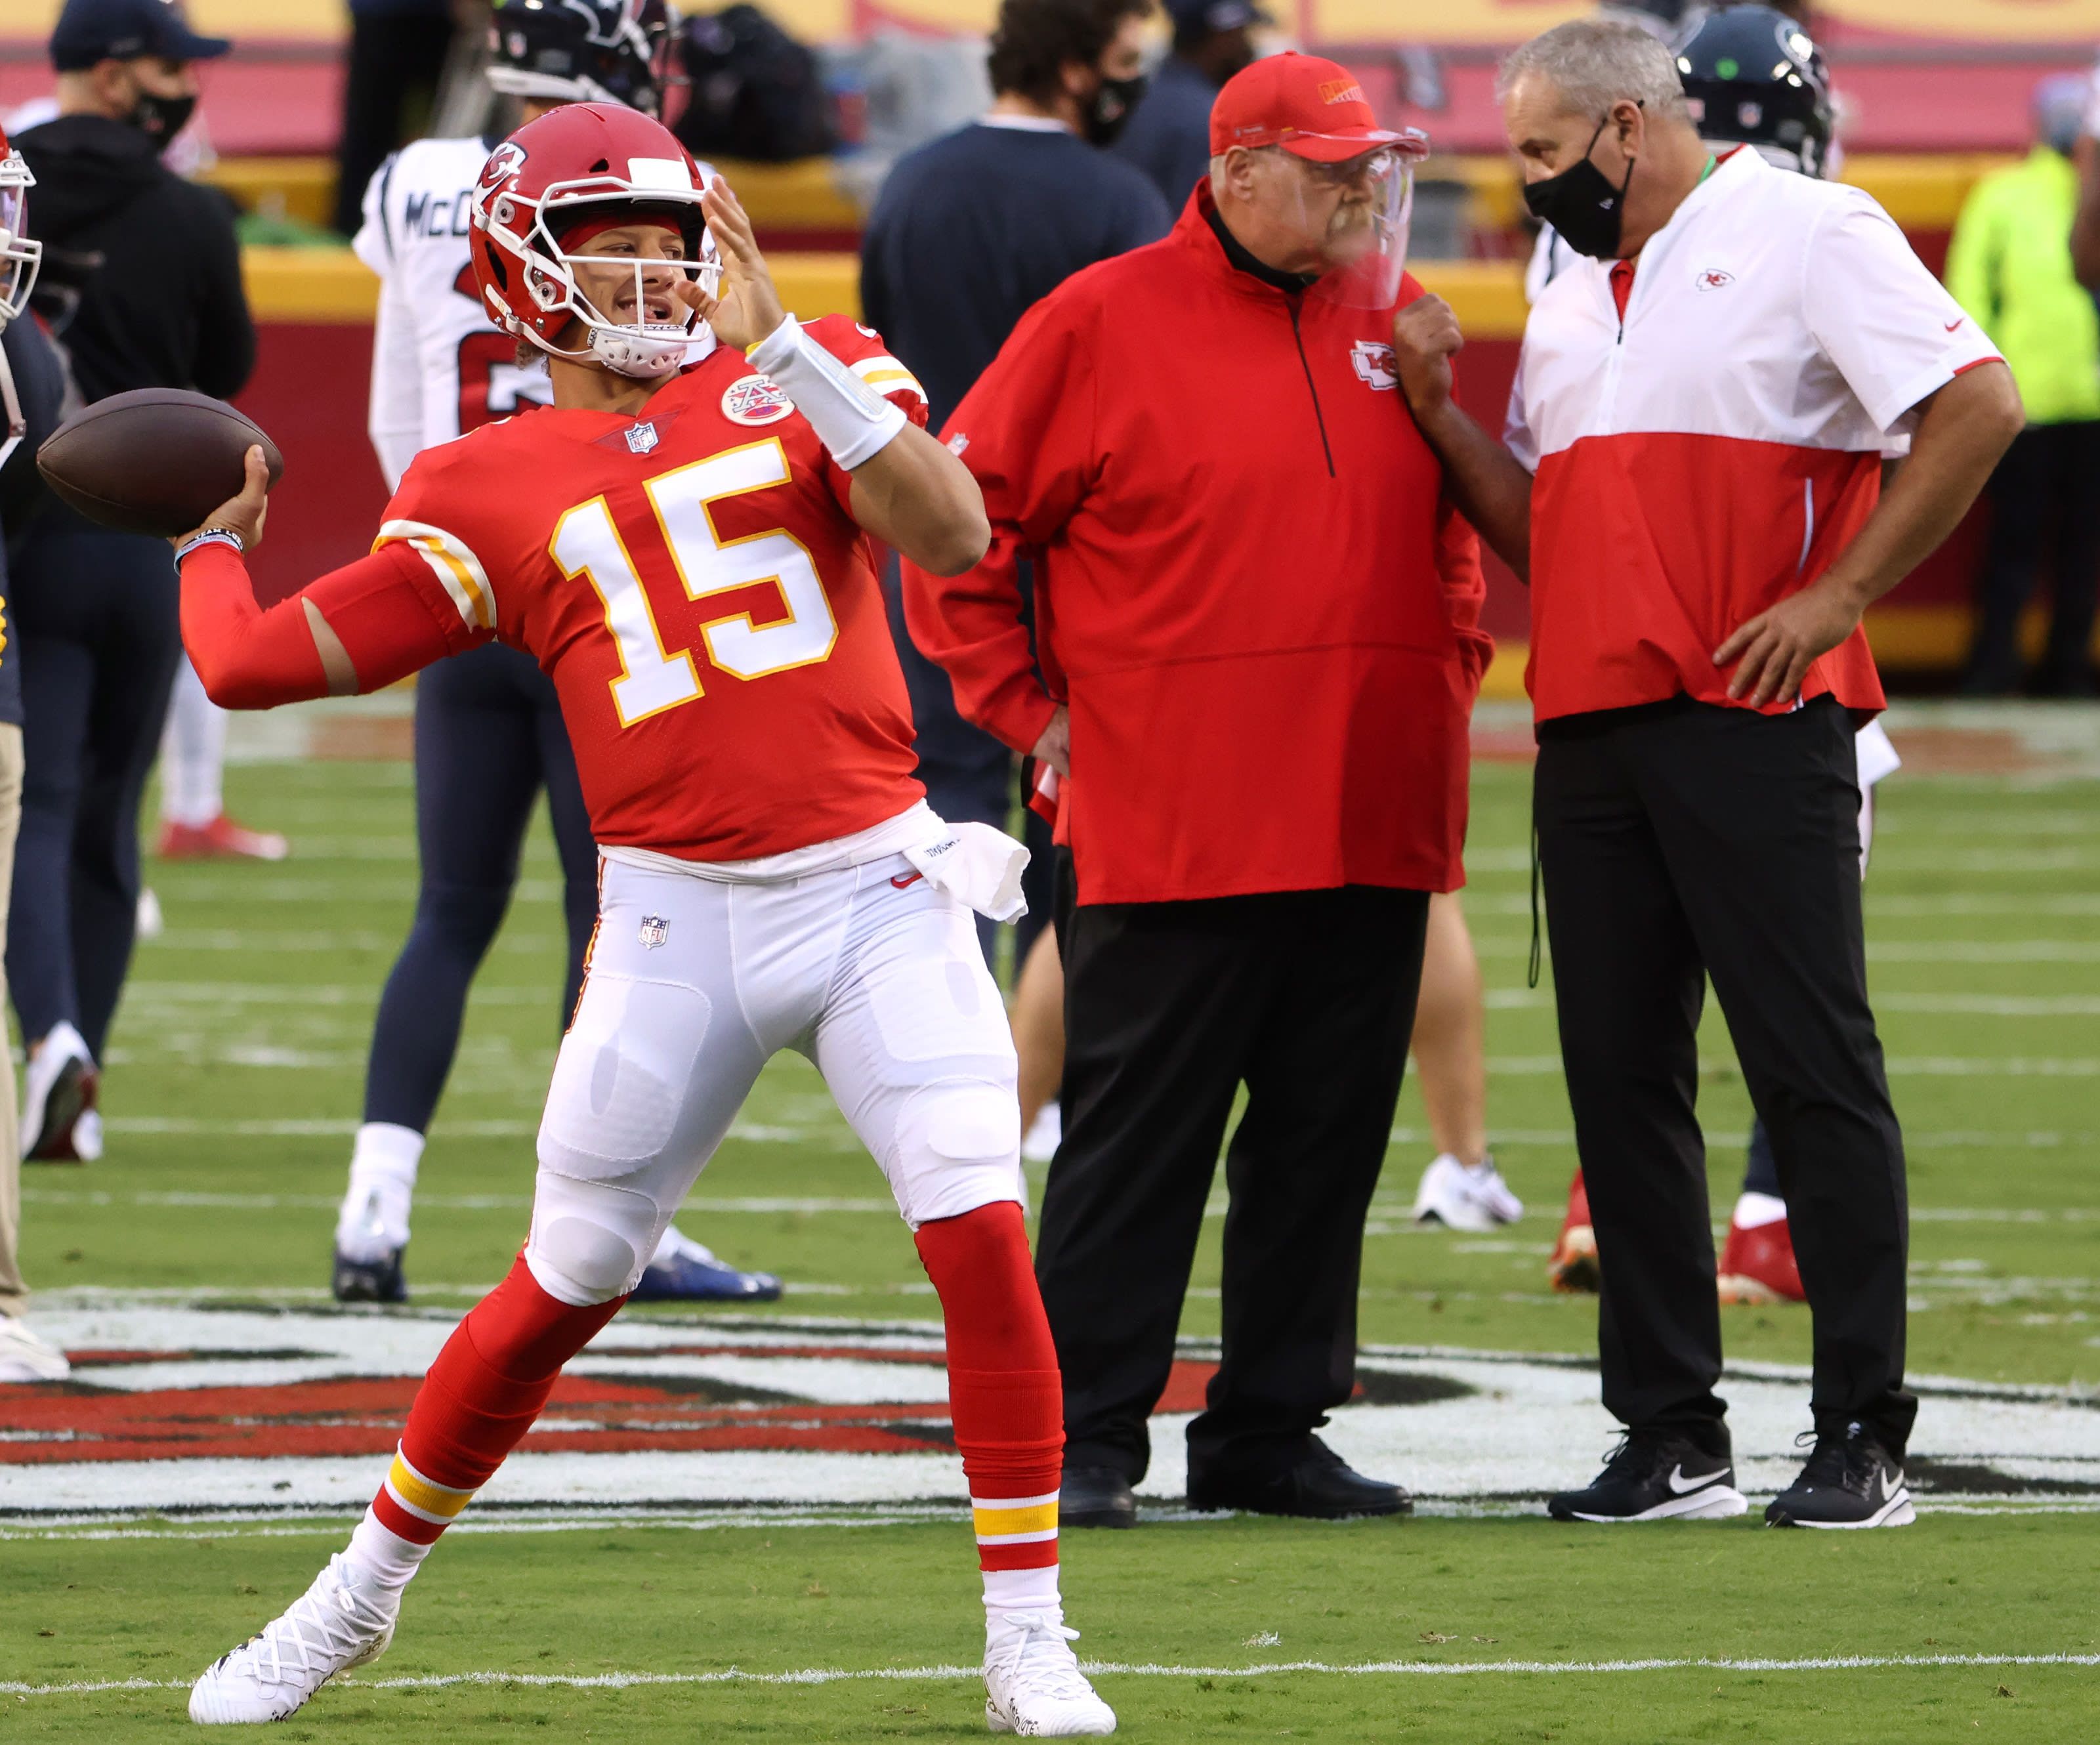 Grading the KC Chiefs offense prior to the 2021 NFL Draft